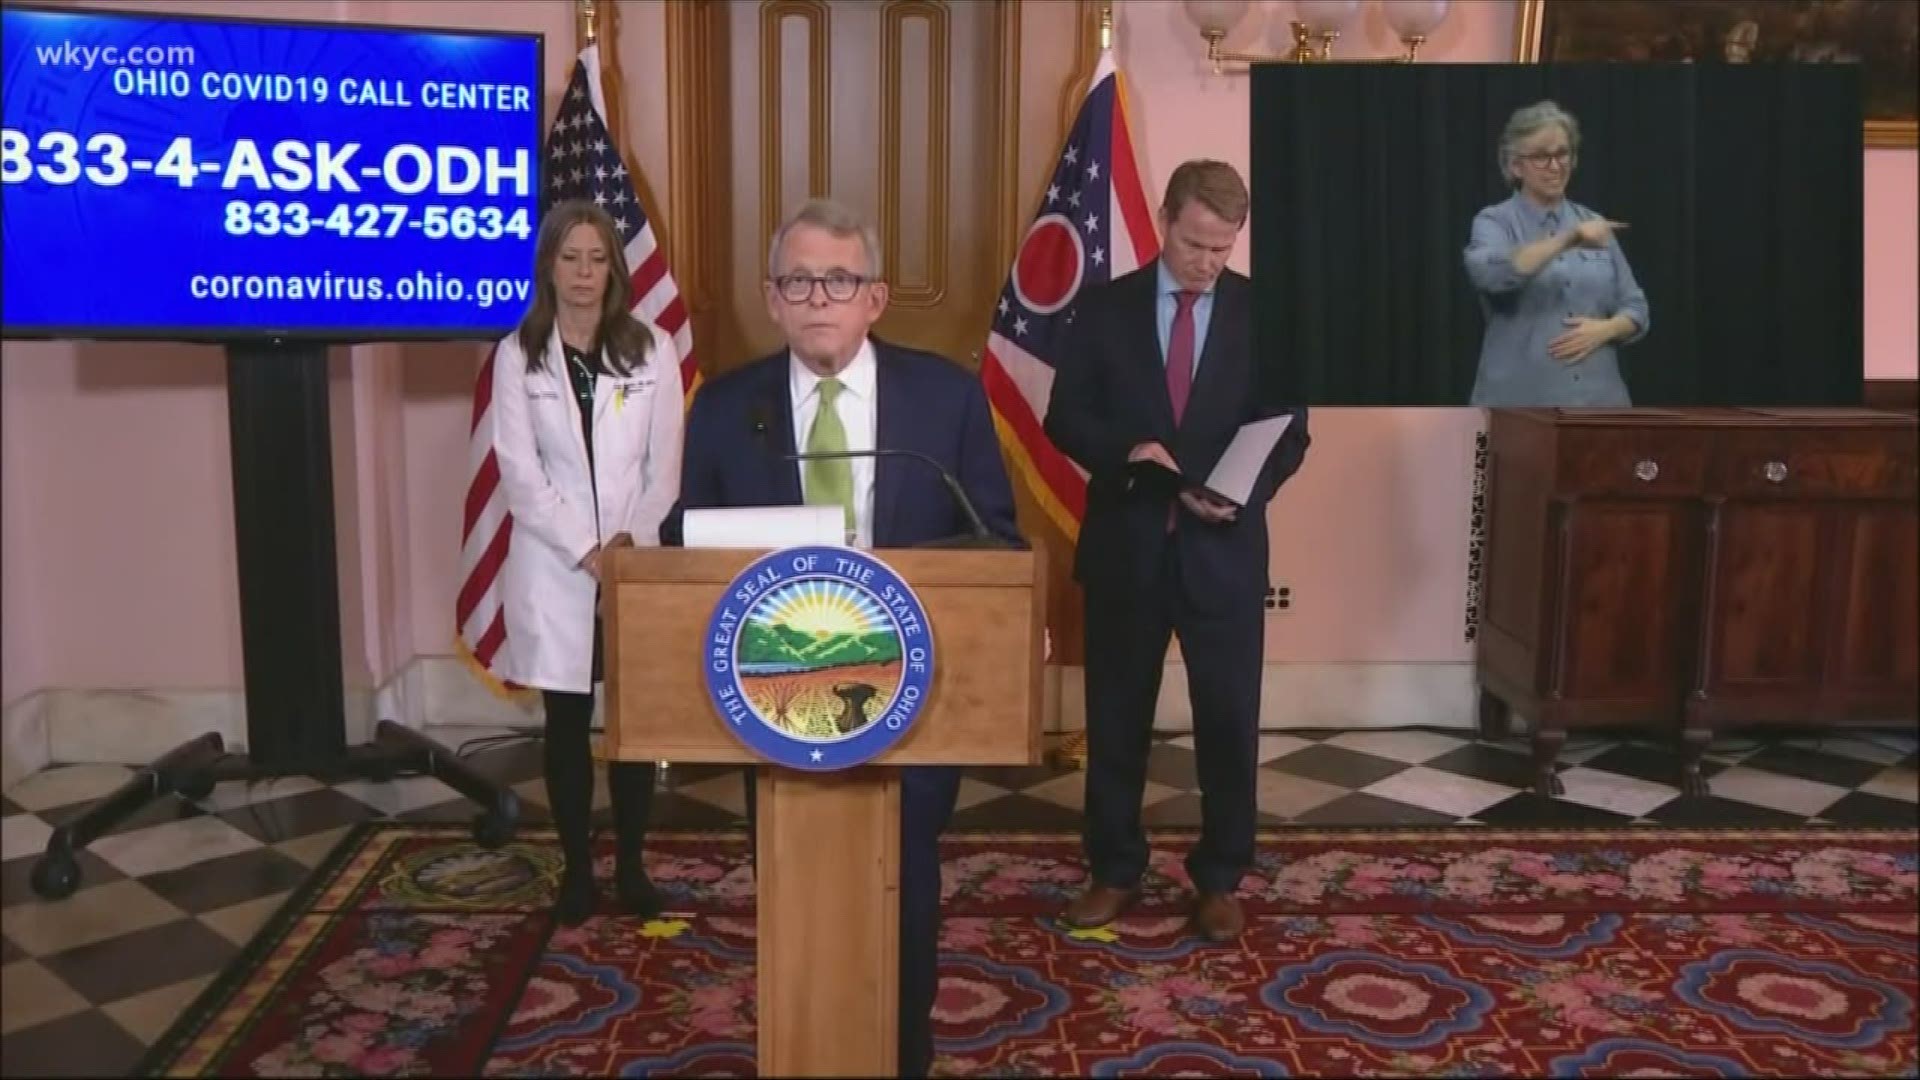 Gov. DeWine signed an executive order on Friday. The state's senior citizen centers will close at the end of business on Monday.